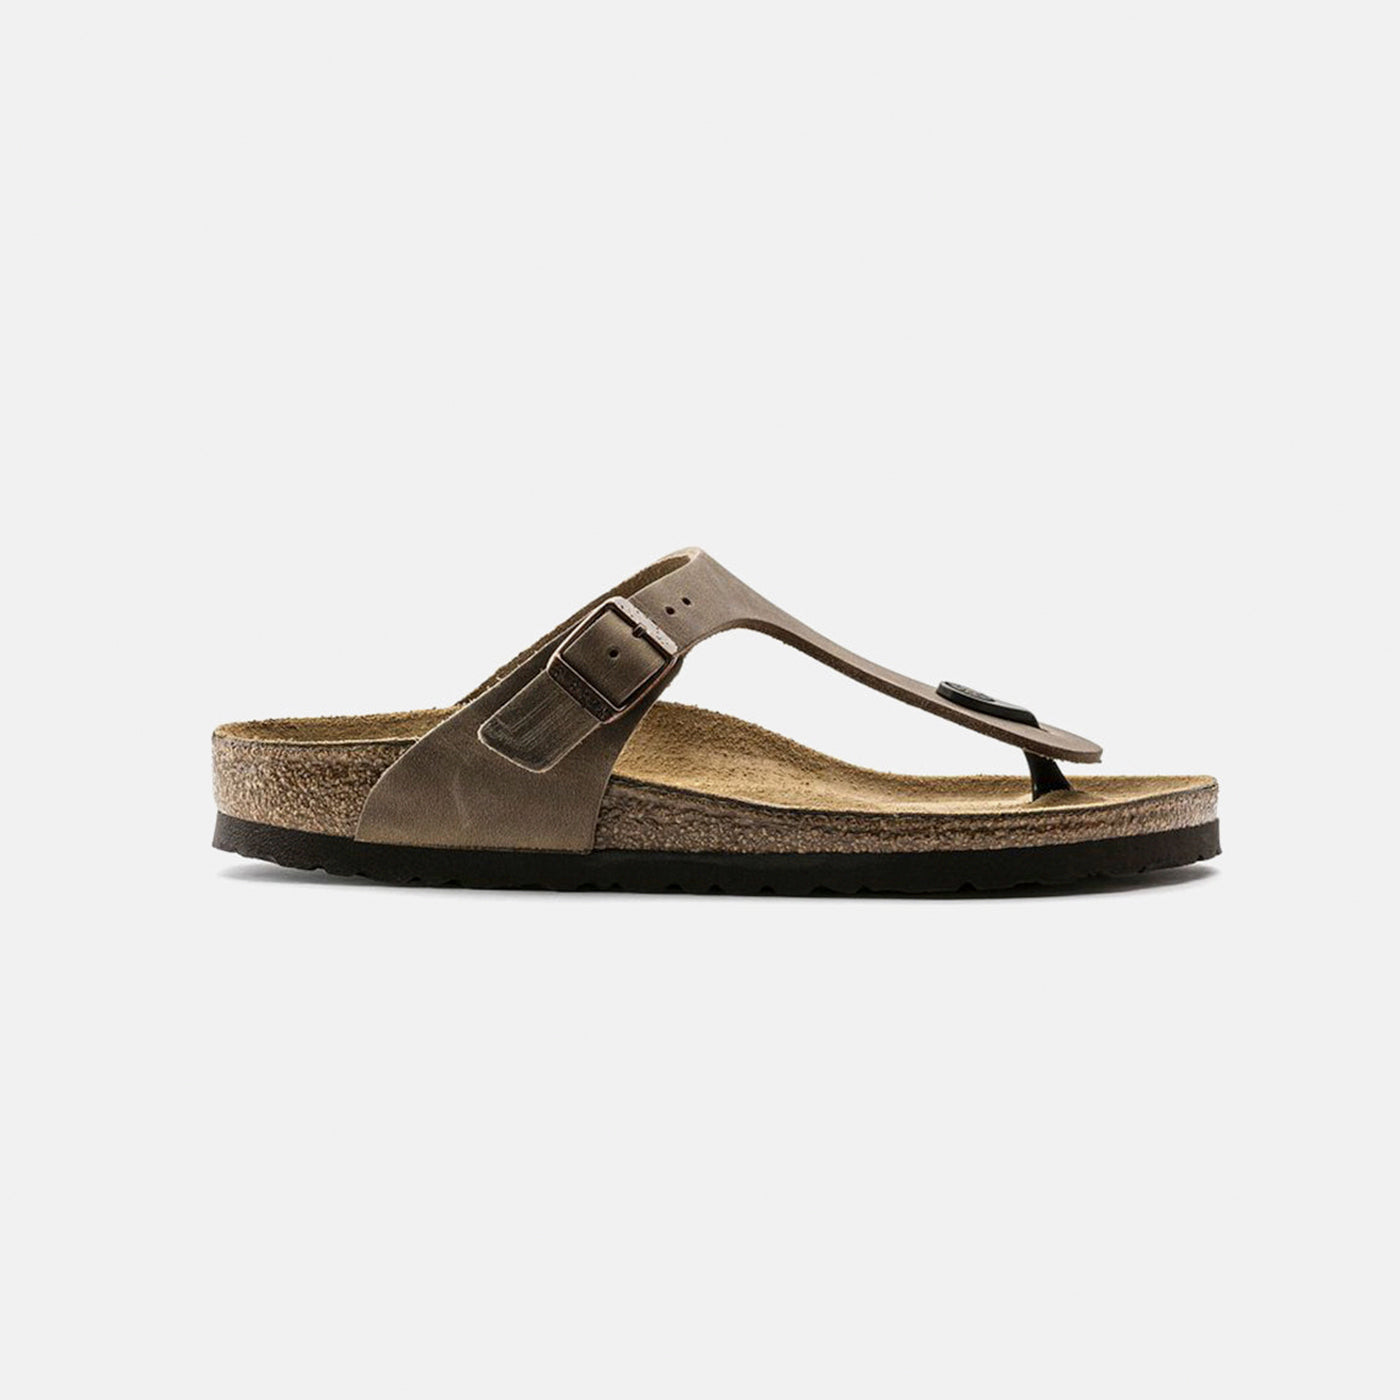 Birkenstock - Gizeh - Oiled Leather - Tabacco Brown - Regular